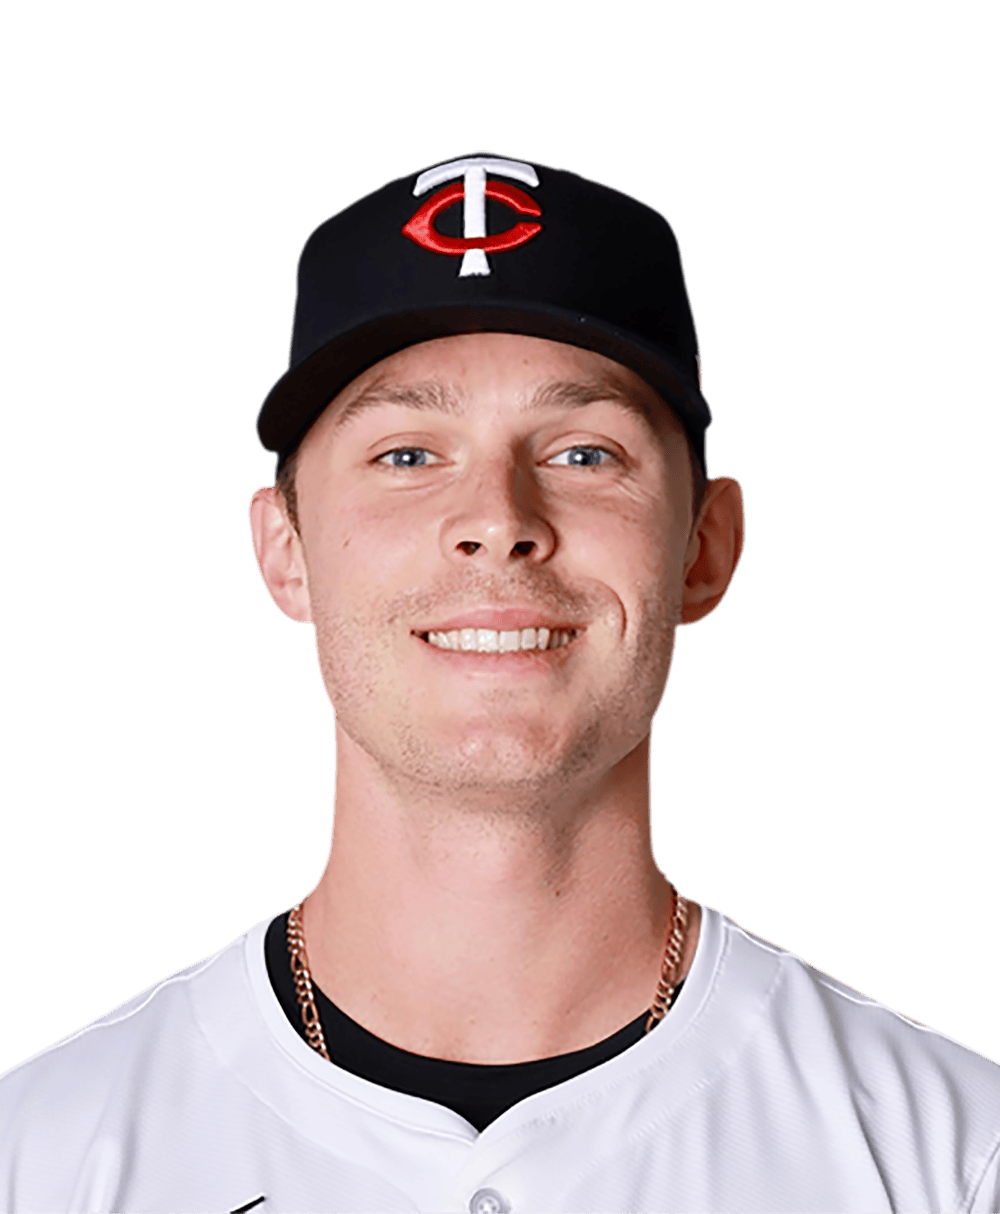 Max Kepler not in lineup for Minnesota on Saturday